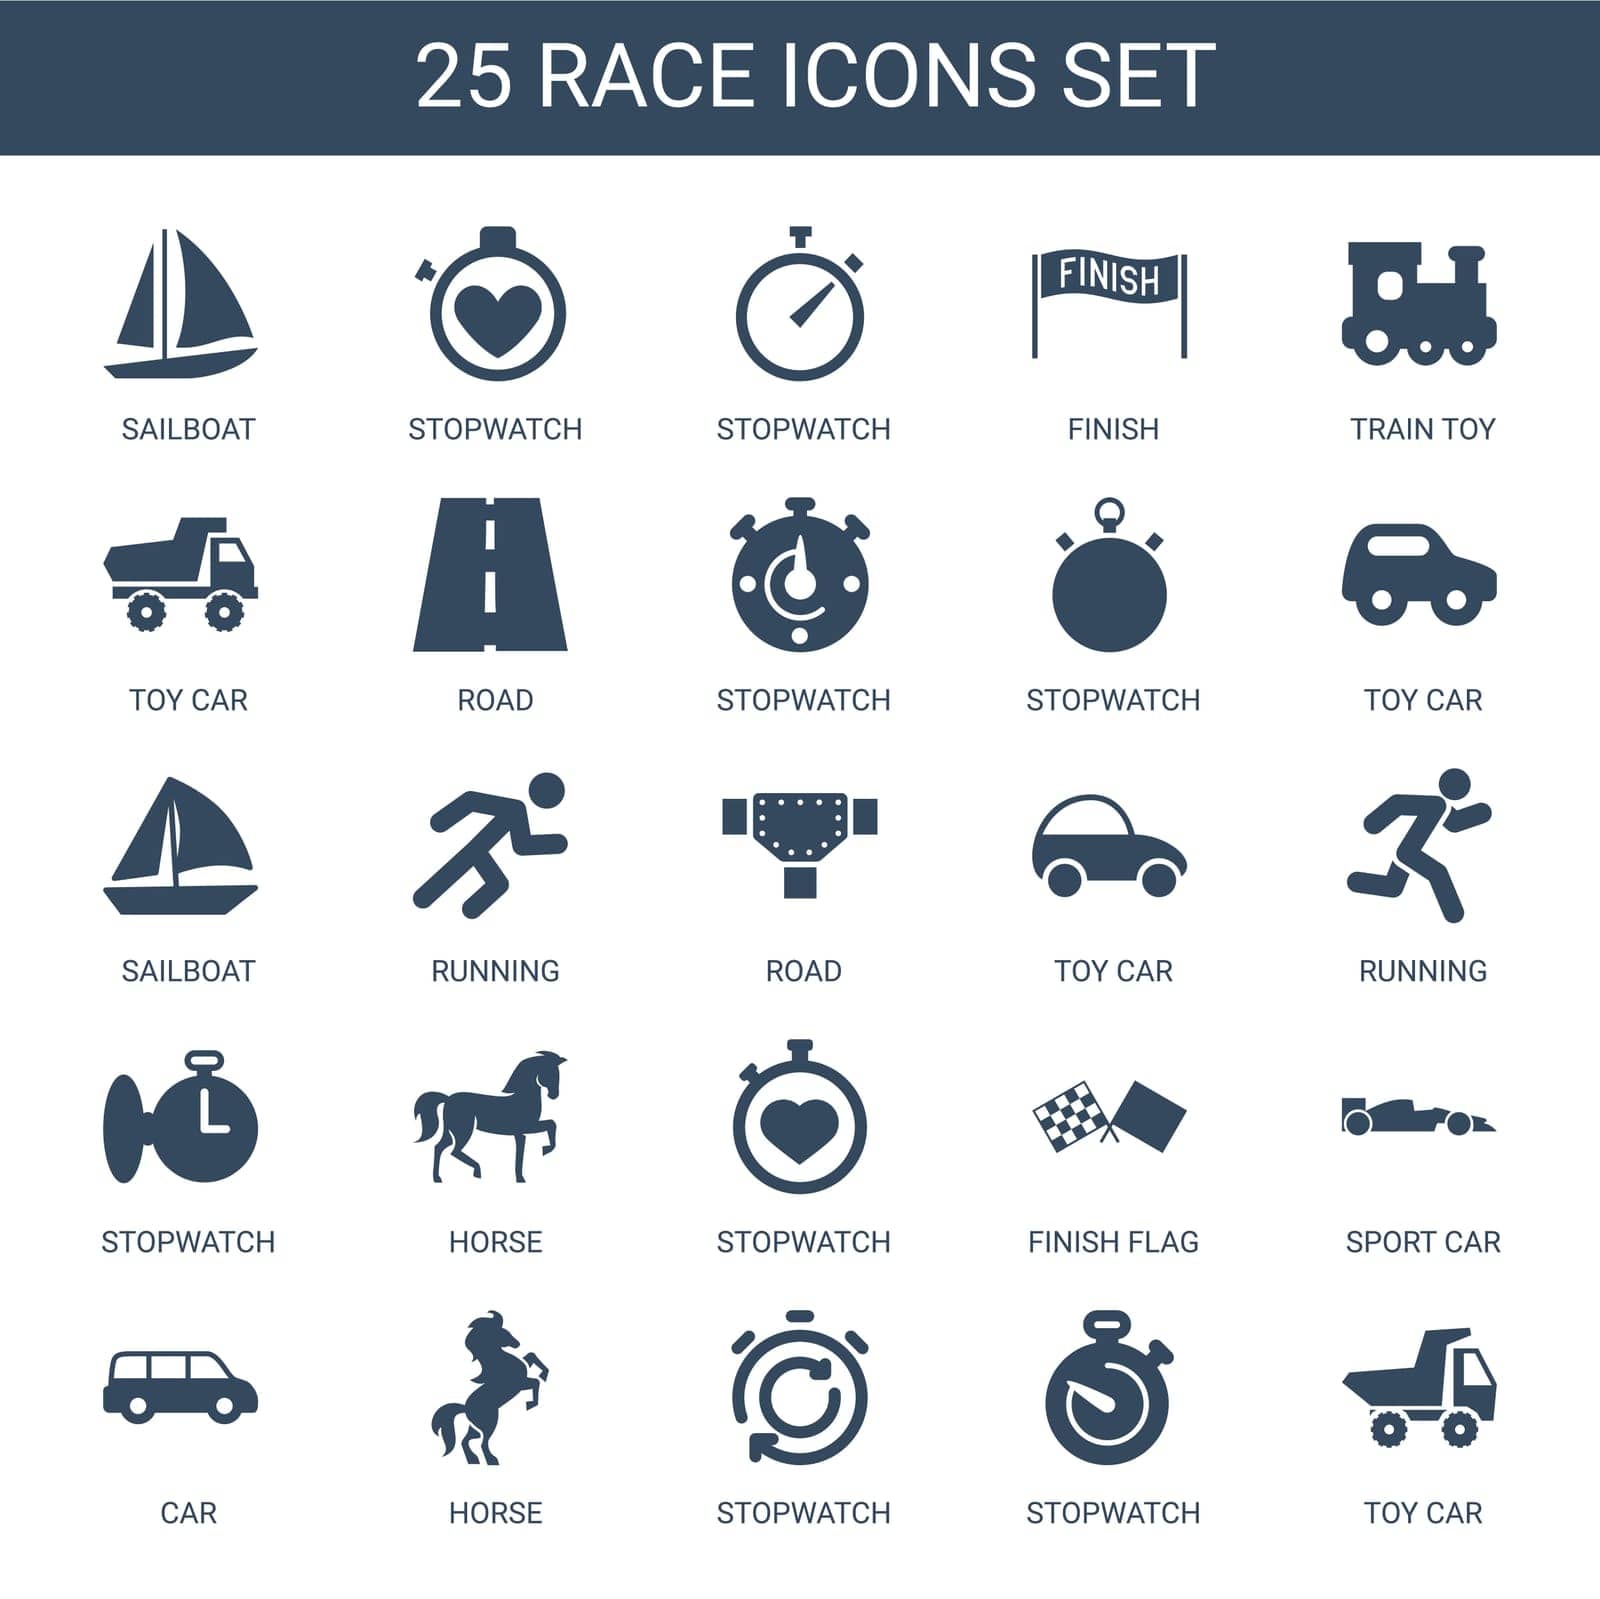 symbol,sailboat,quick,flag,concept,icon,sign,isolated,competition,speed,running,timer,white,car,road,design,finish,vector,graphic,train,toy,set,race,start,transport,clock,minute,horse,stop,watch,background,silhouette,illustration,time,drive,sport,stopwatch by ogqcorp